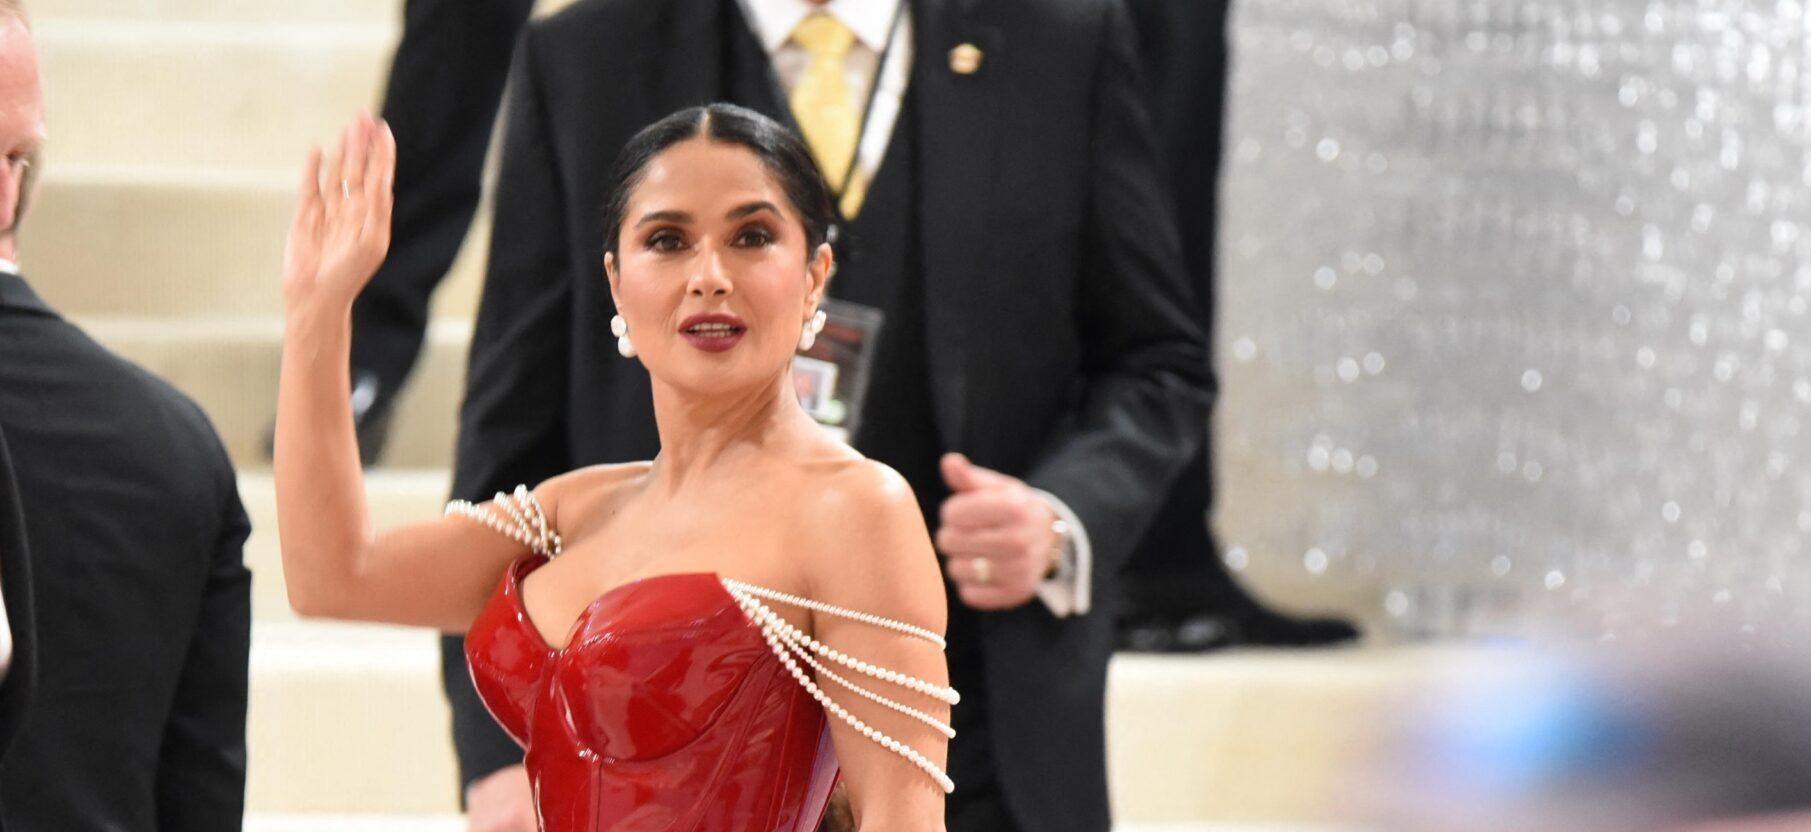 Salma Hayek Puts Sultry Dance Moves On Display After Reaching New Milestone On Instagram